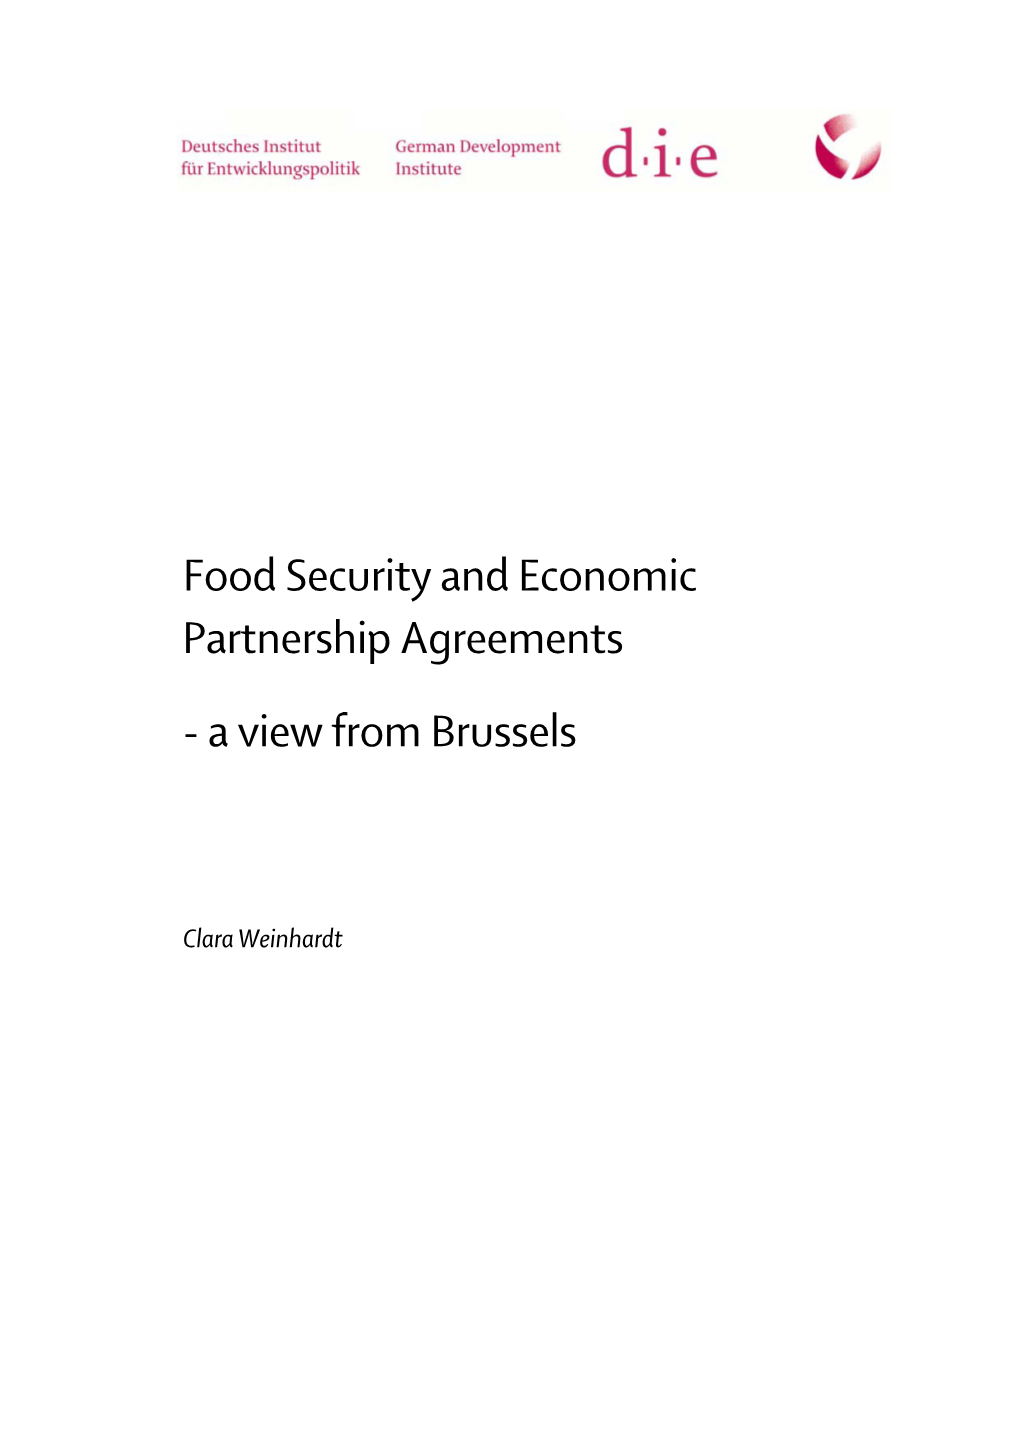 Food Security and Economic Partnership Agreements - a View from Brussels